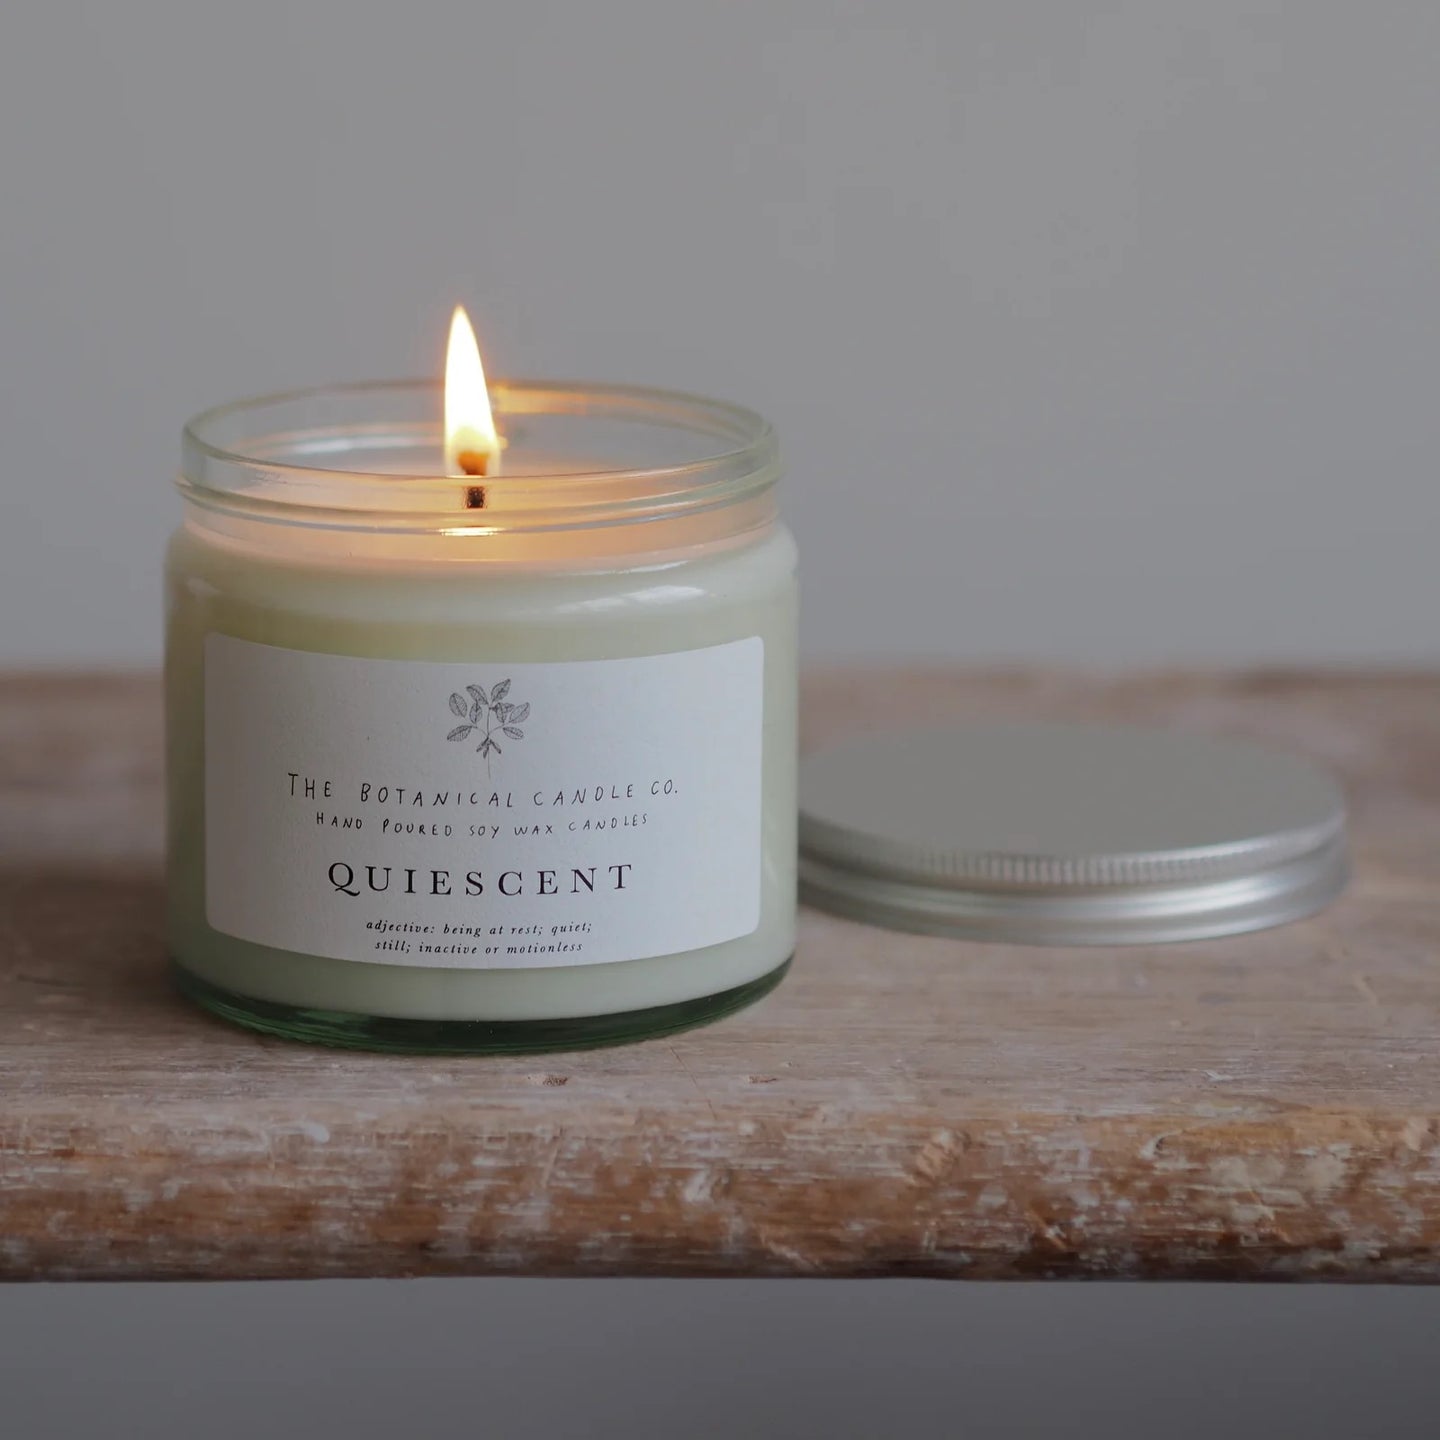 Quiescent Soy Wax Candle - The Botanical Candle Co.